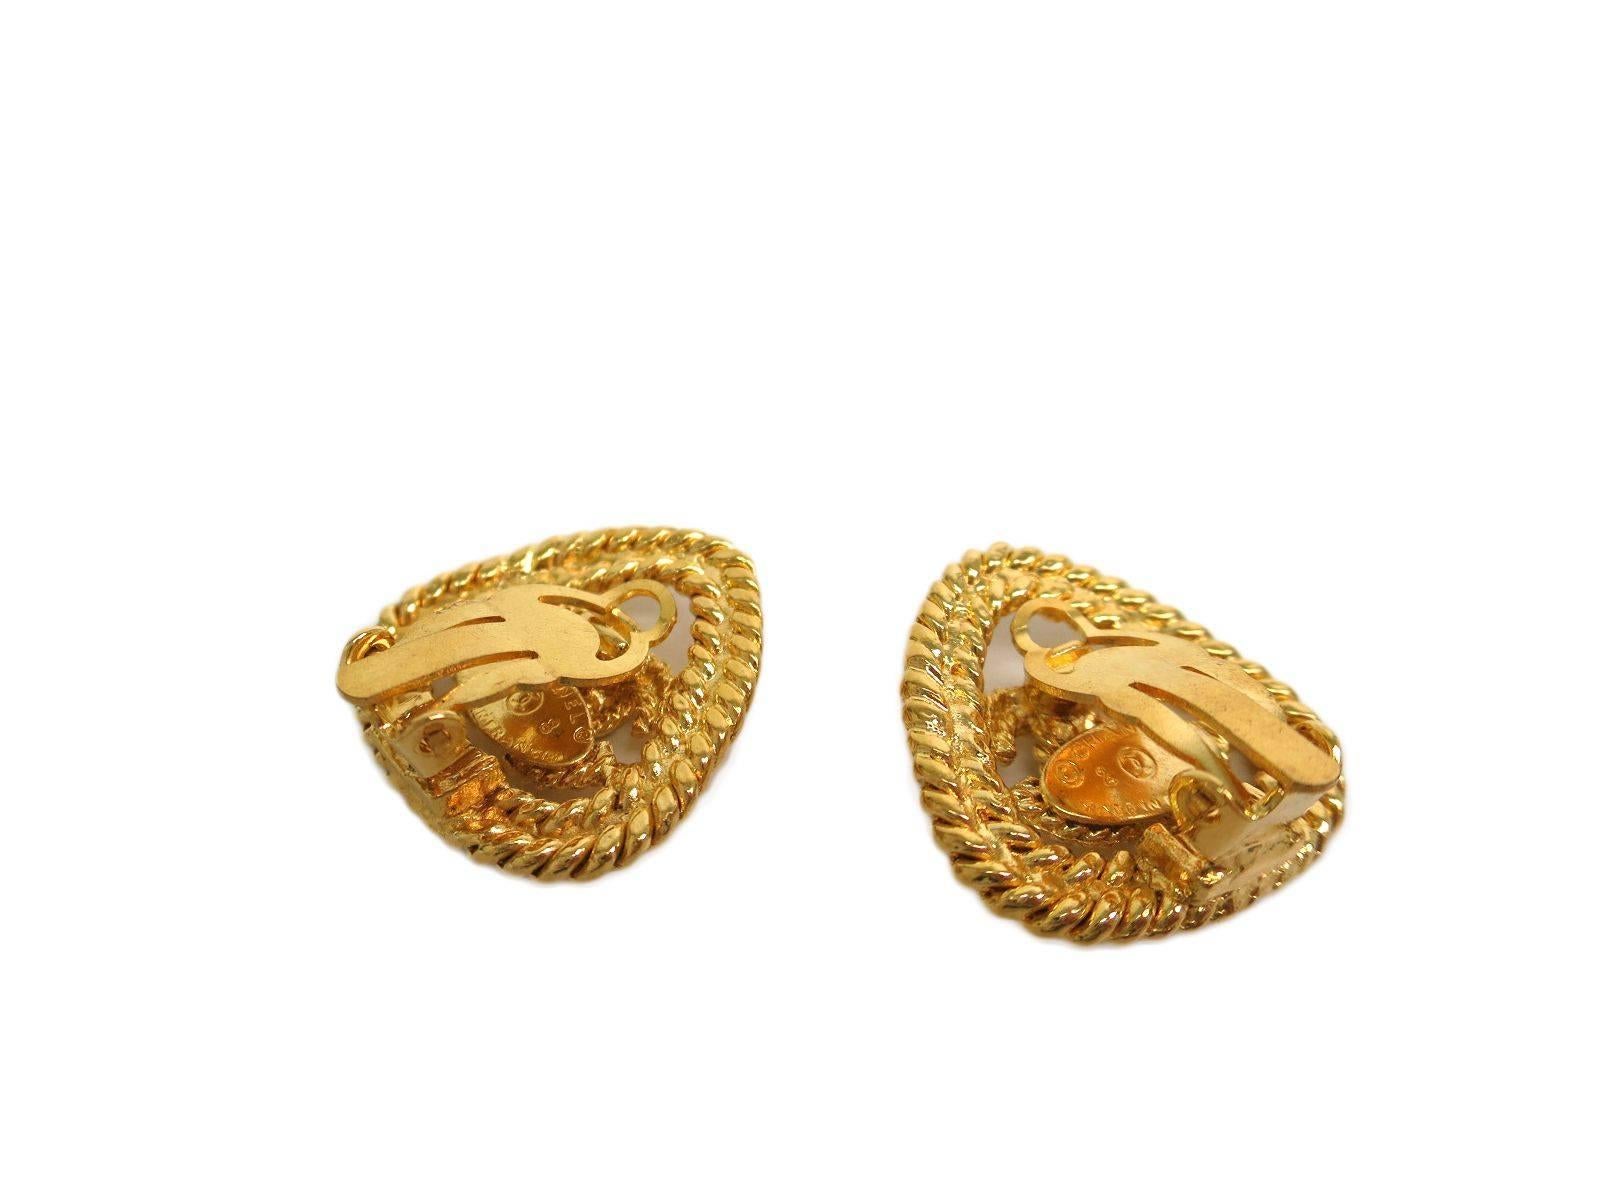 CURATOR'S NOTES

For the classy lady, Newfound Luxury presents these elegant vintage Chanel braided CC gold tone earrings.

Gold tone 
Clip on closure
Made in France
Measures 1.1